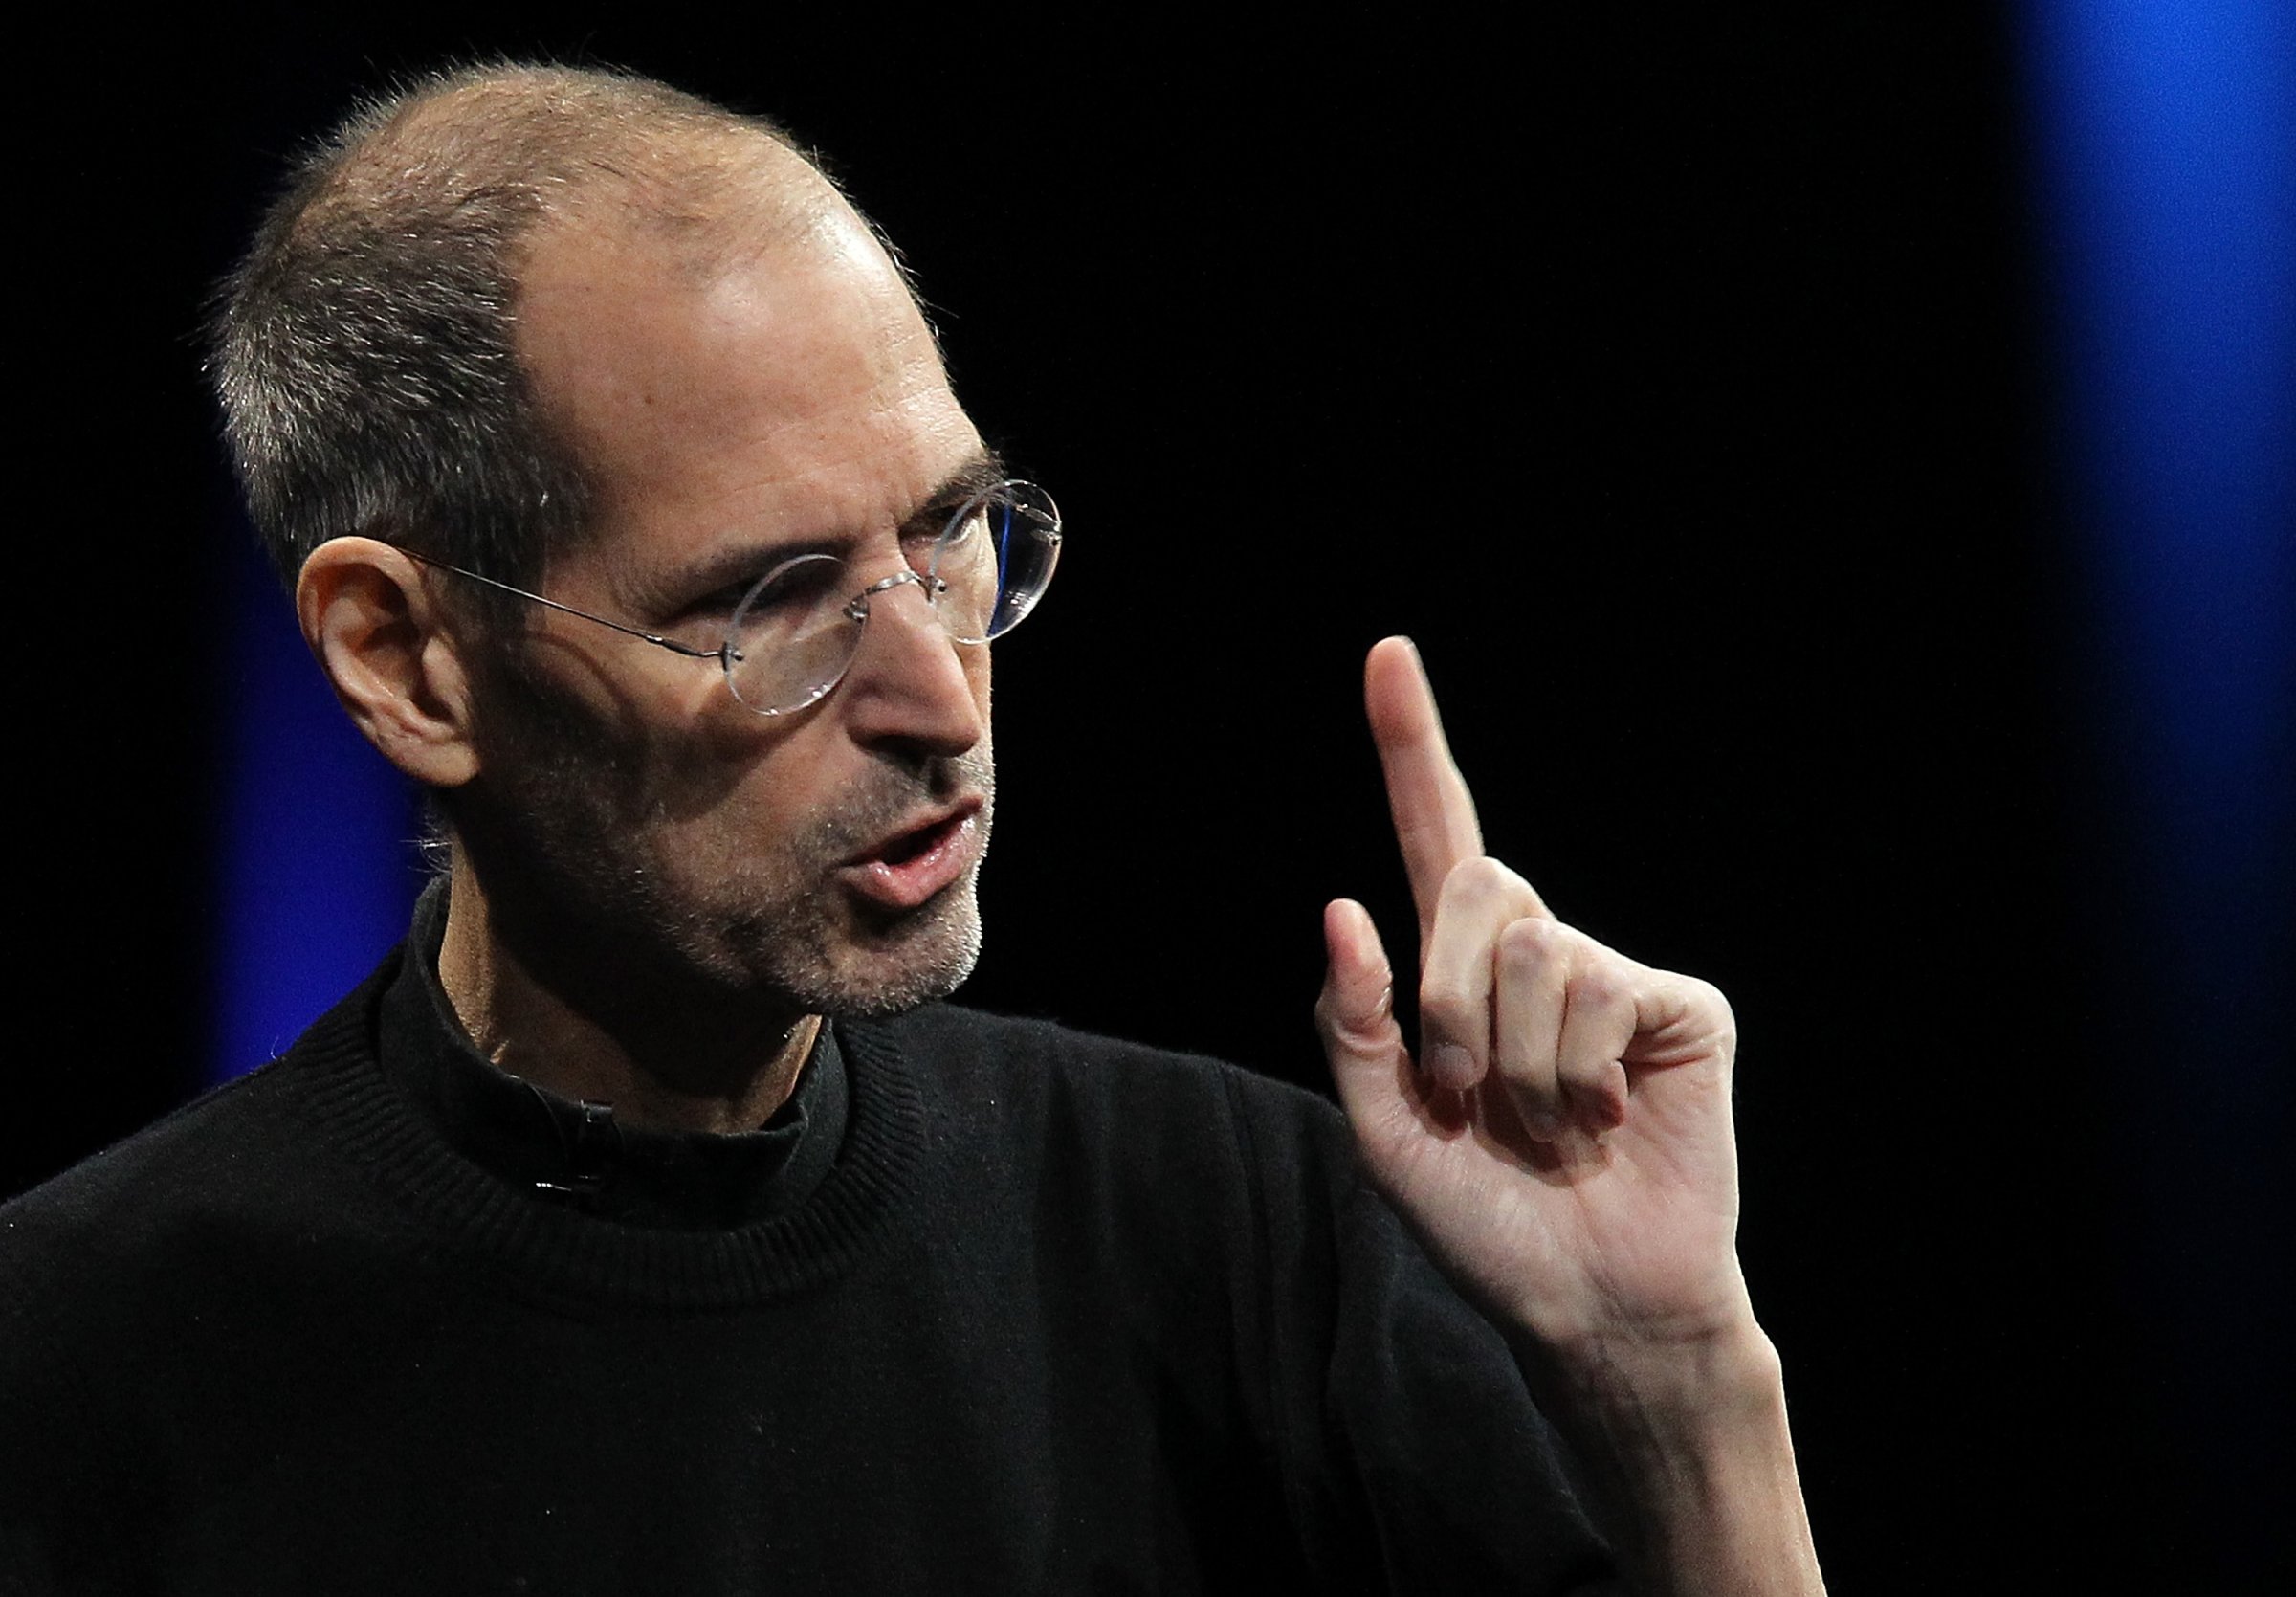 Apple CEO Steve Jobs delivers the keynote address at a conference on June 6, 2011 in San Francisco, California.